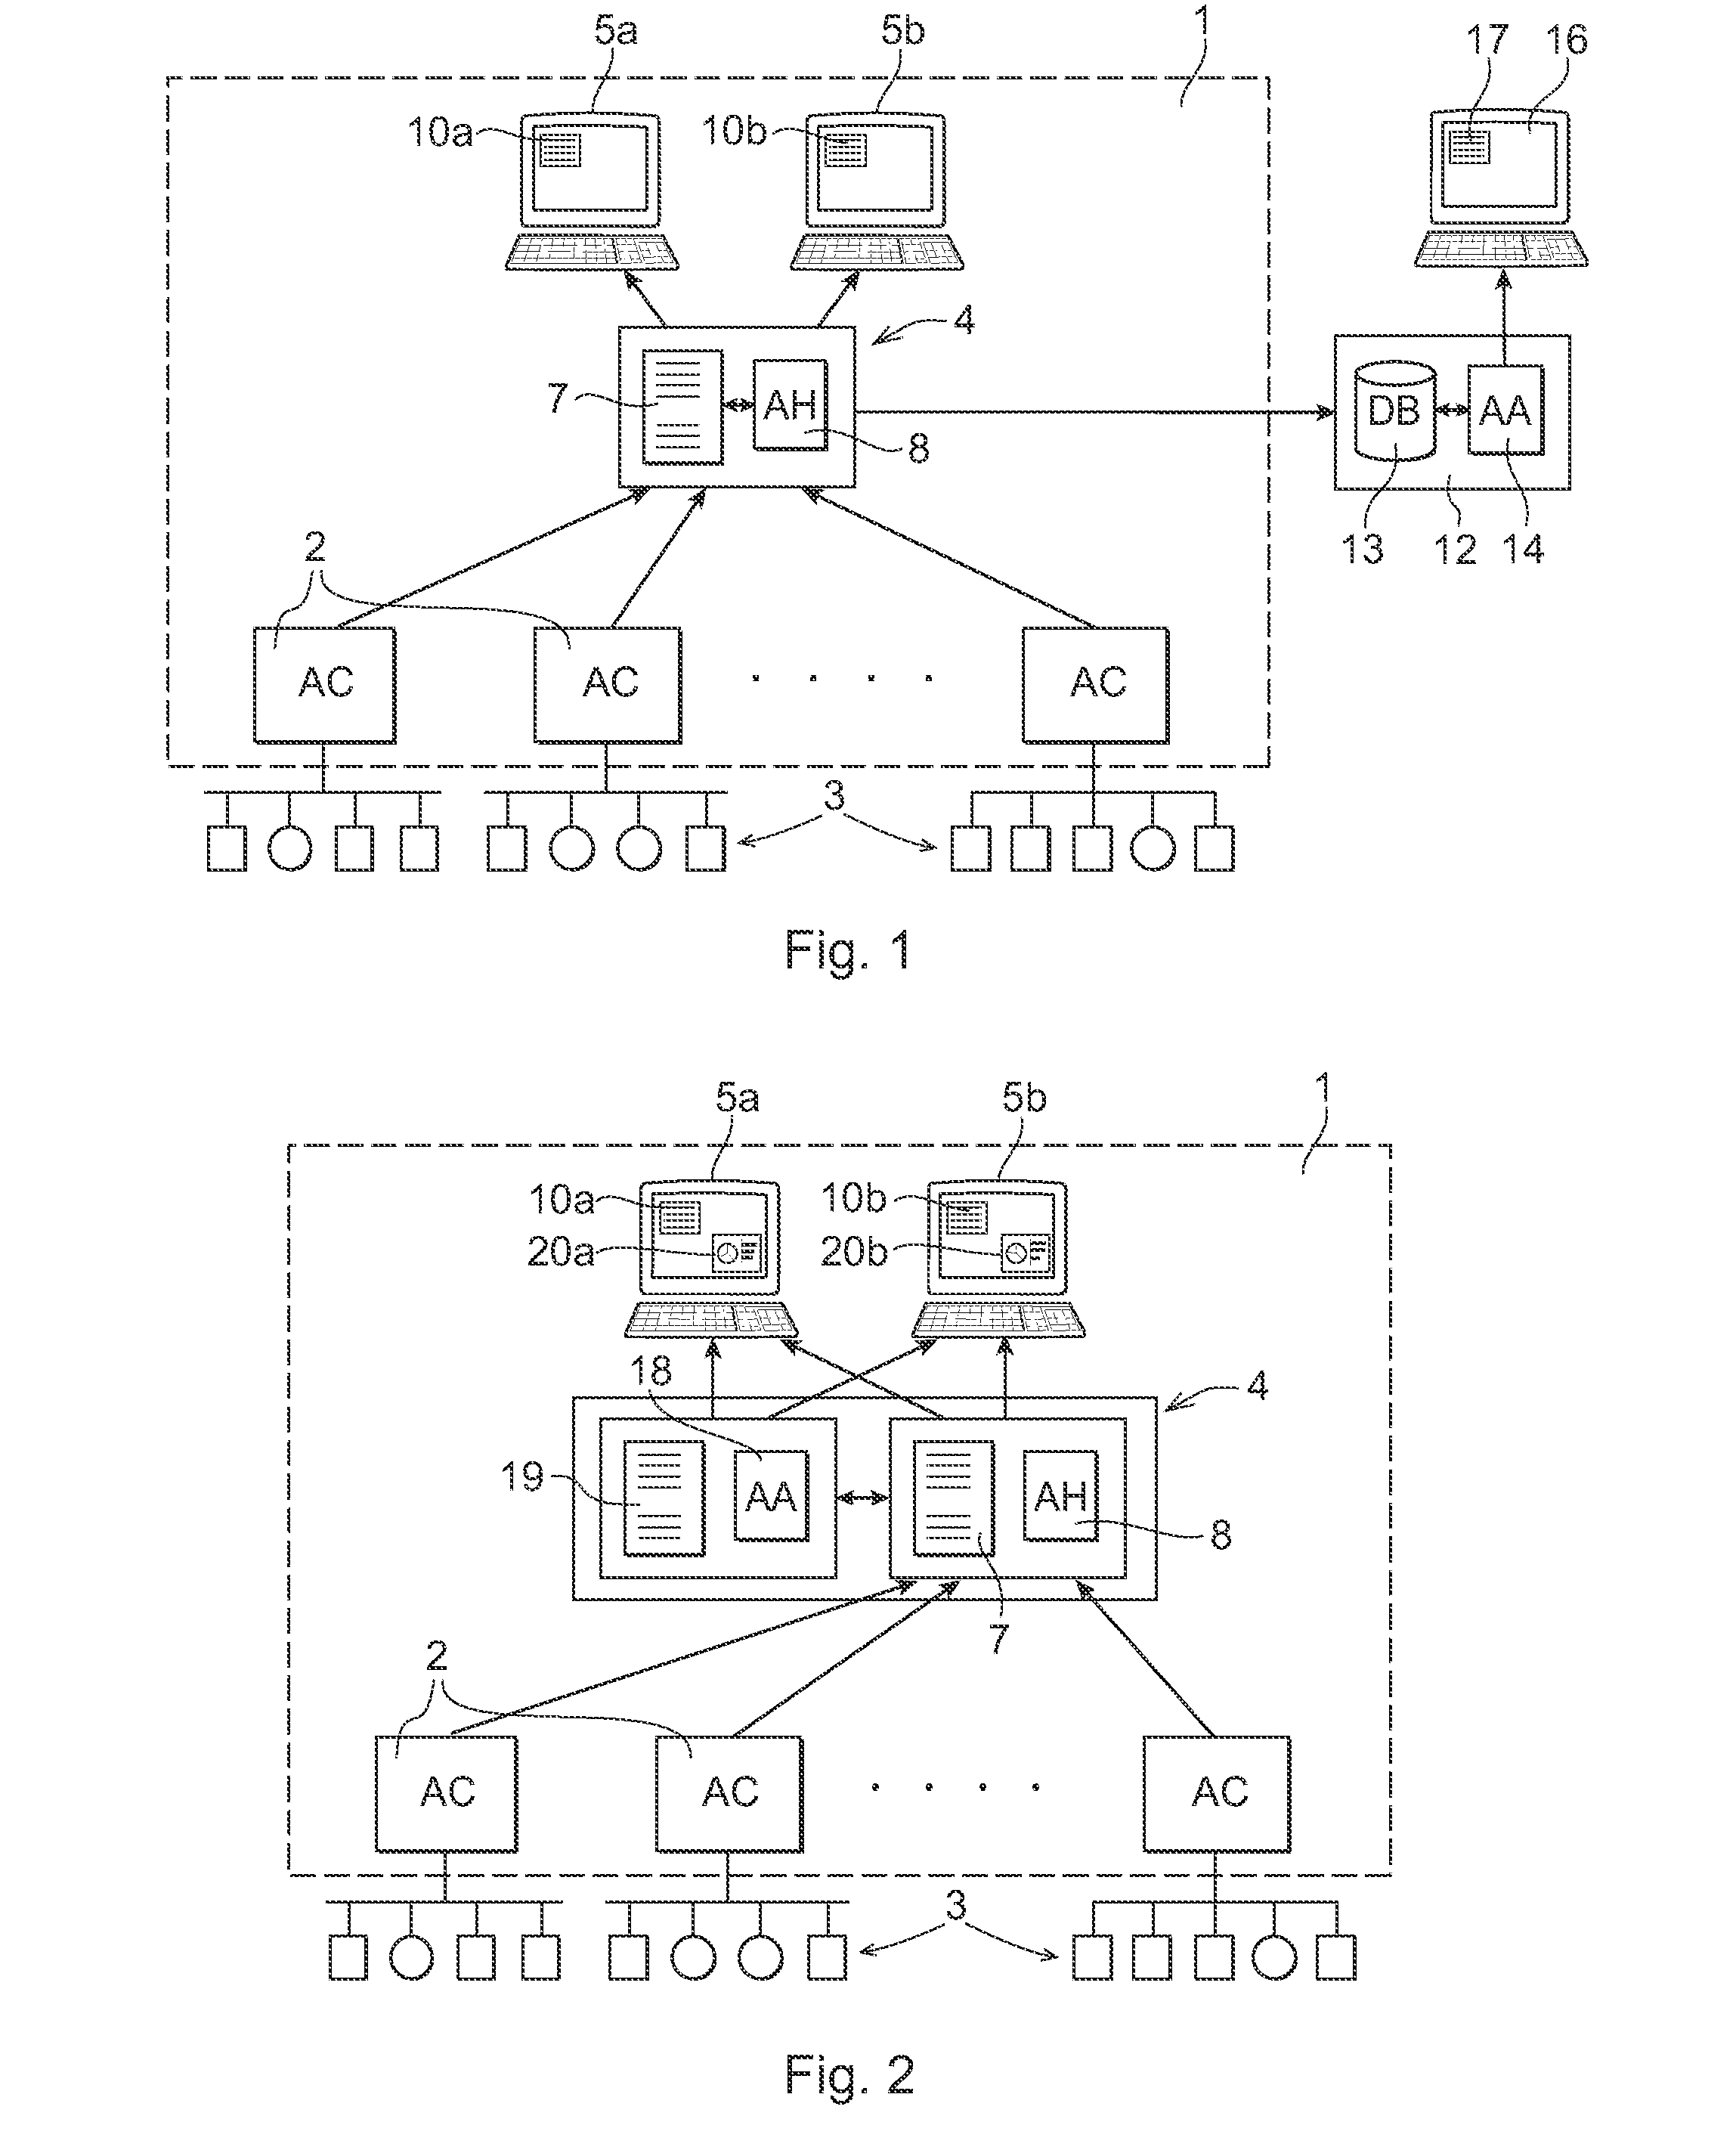 Alarm Analysis System And A Method For Providing Statistics On Alarms From A Process Control System